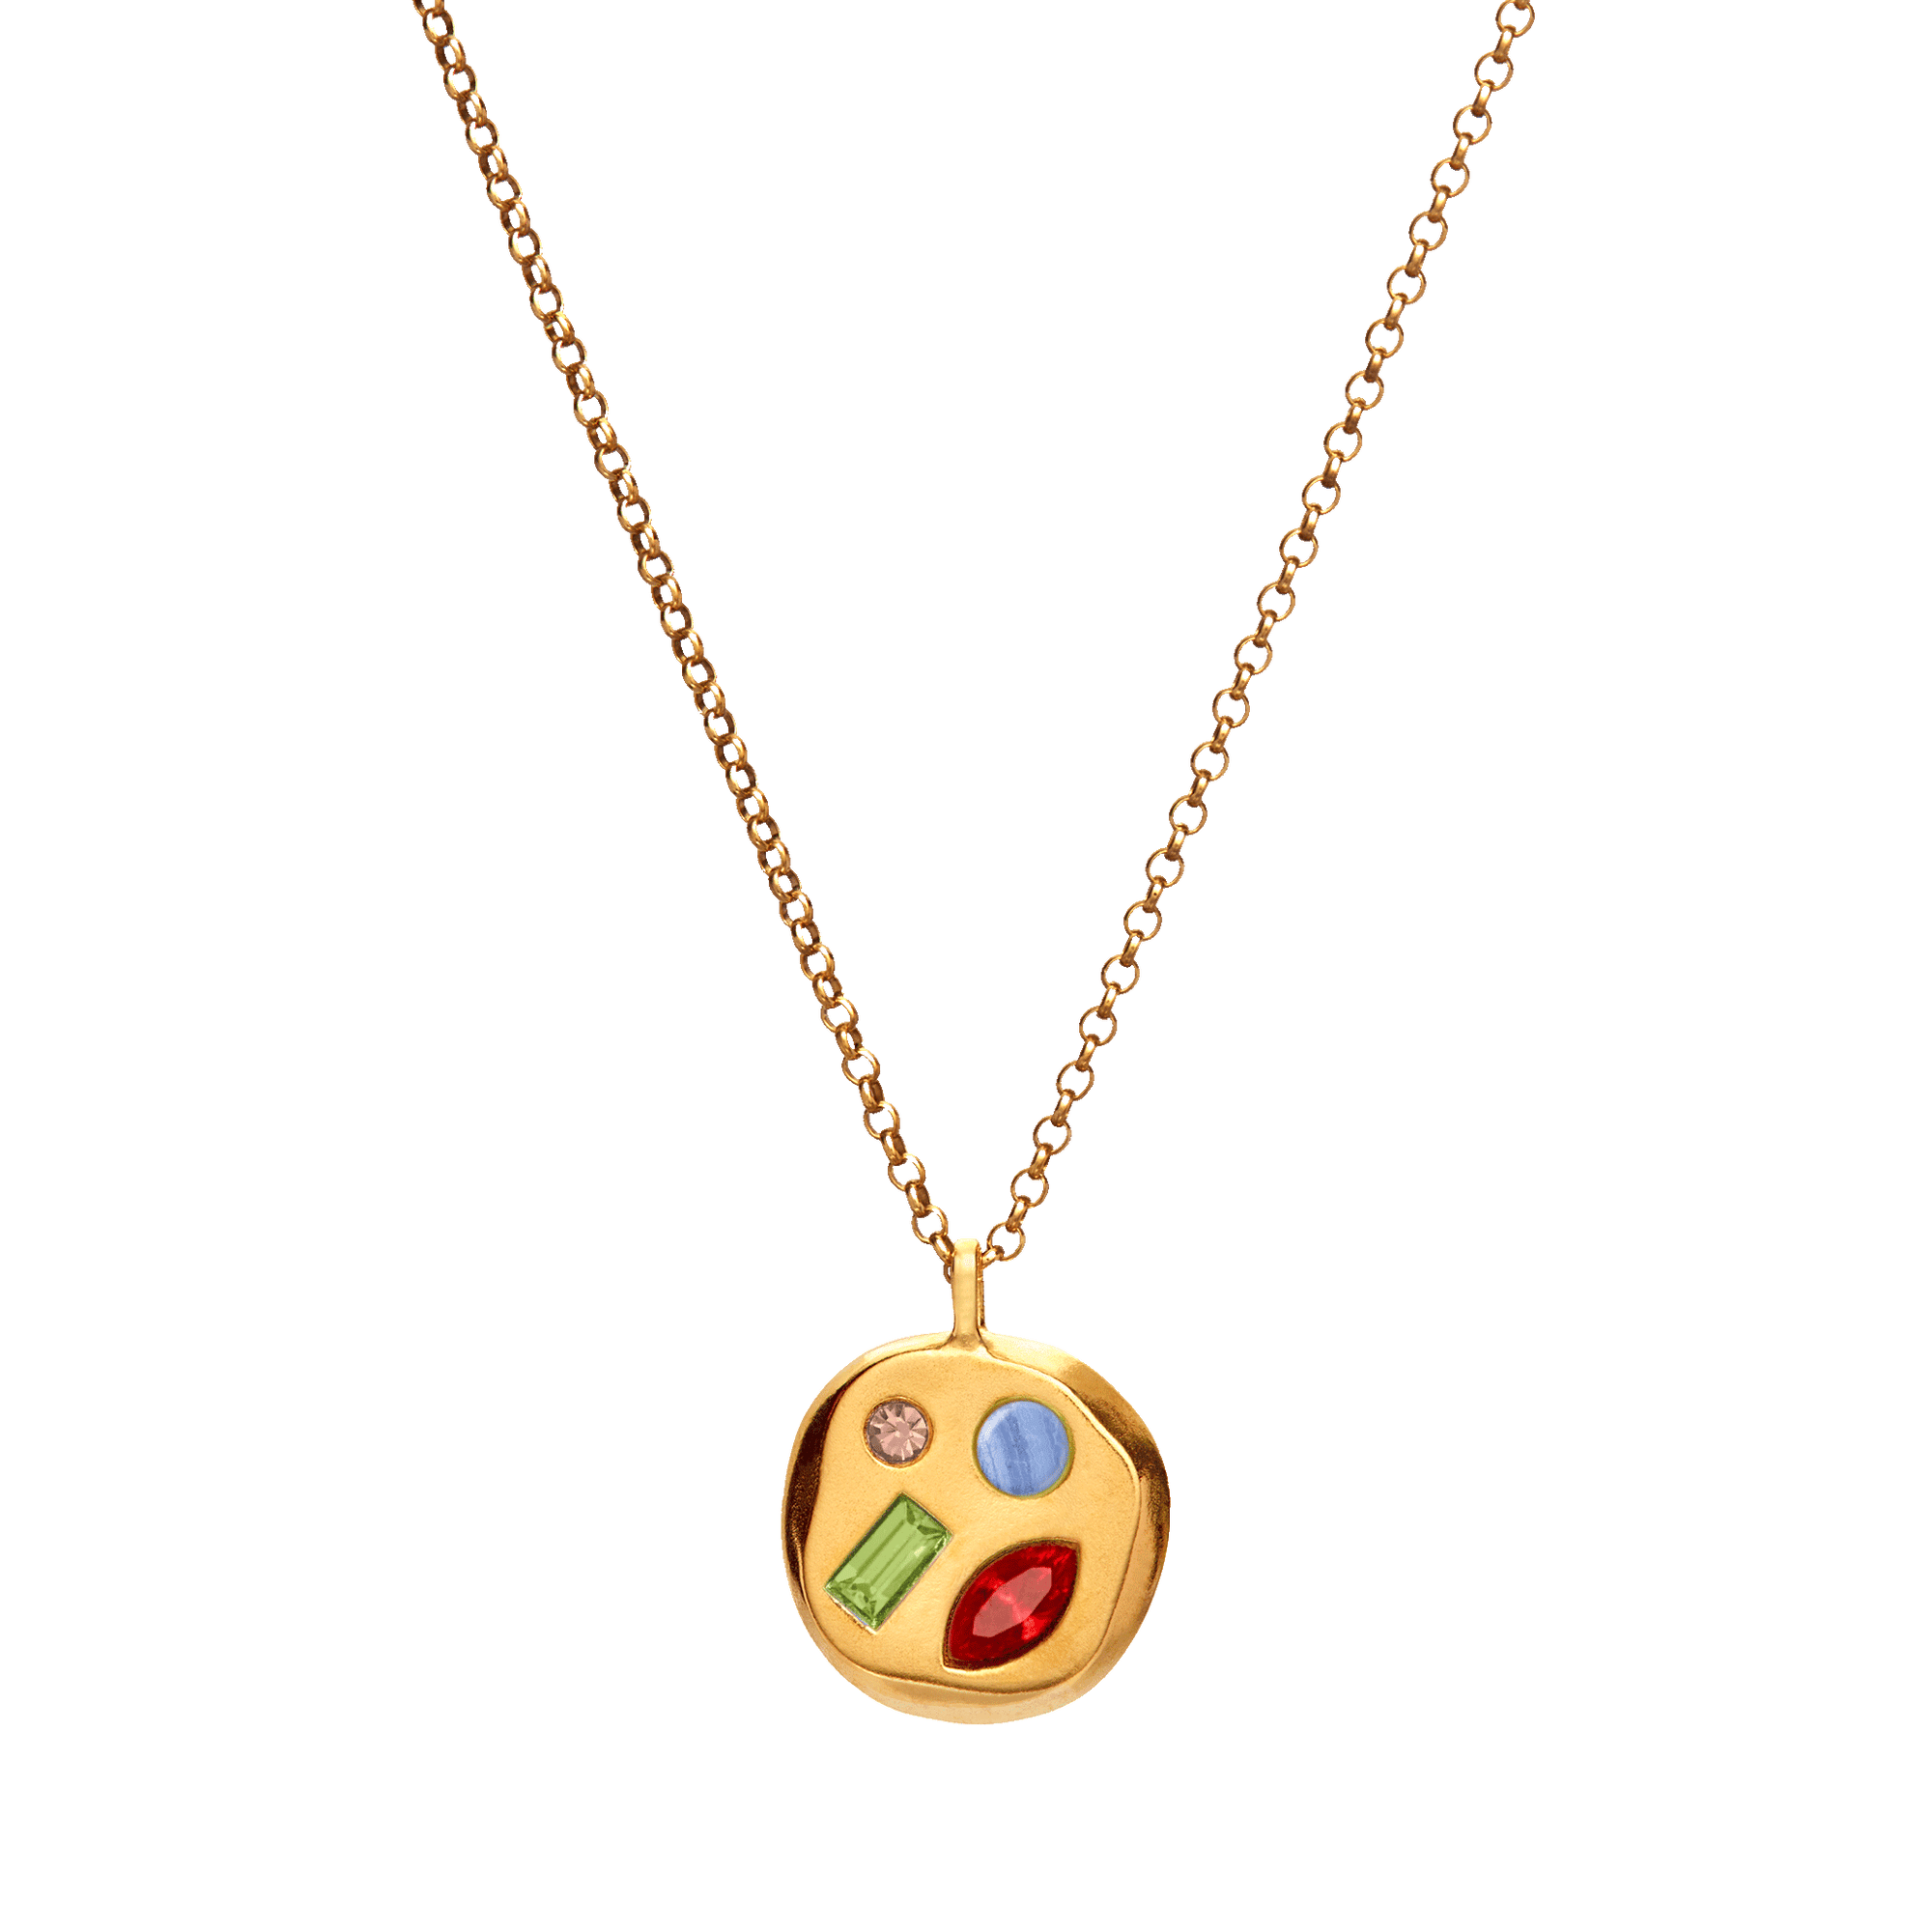 The July Second Pendant